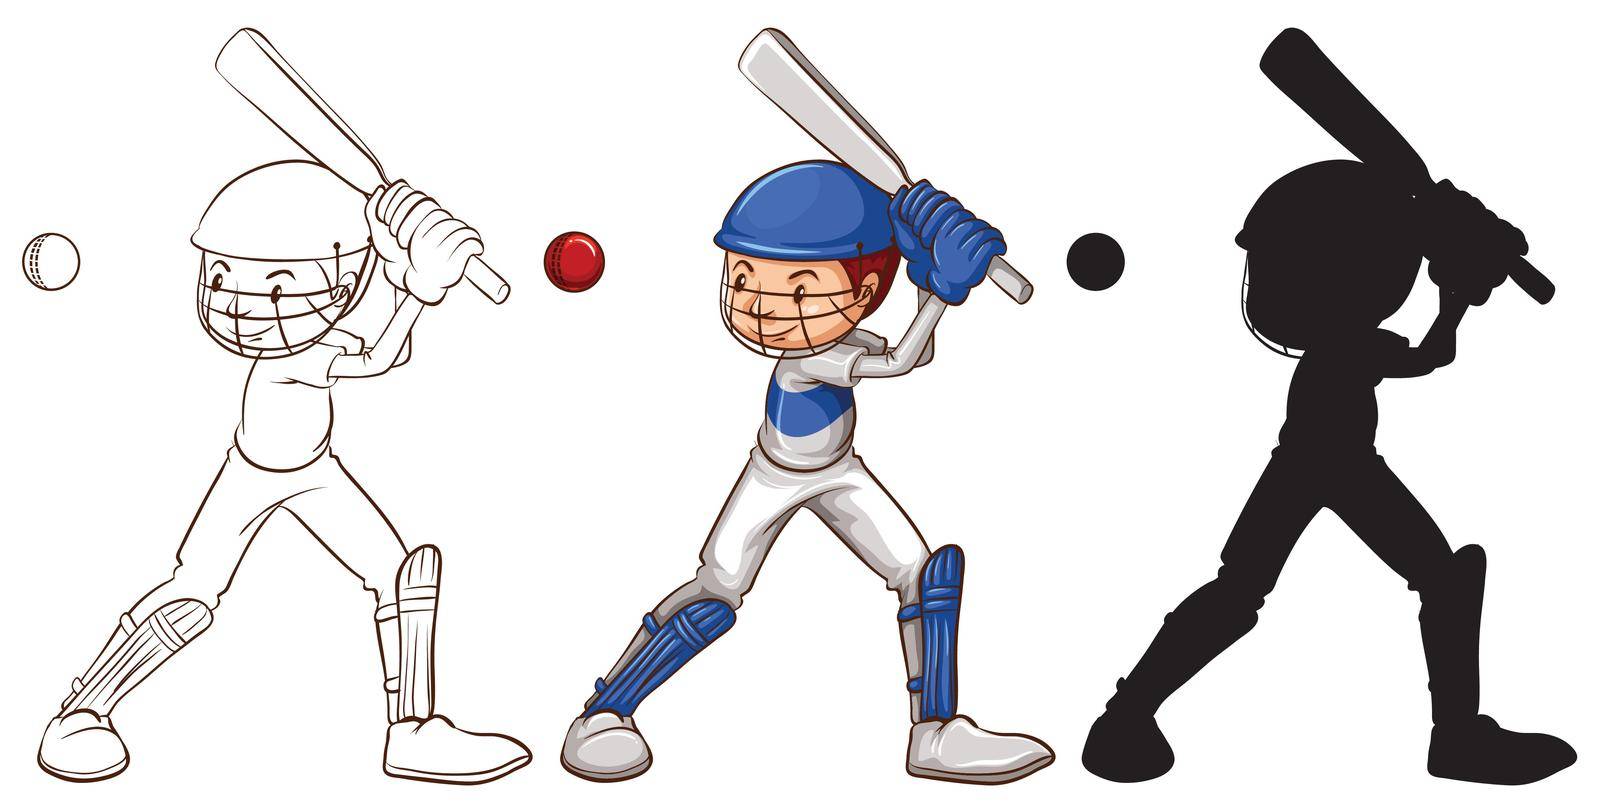 Illustration of the sketches of a man playing baseball on a white background